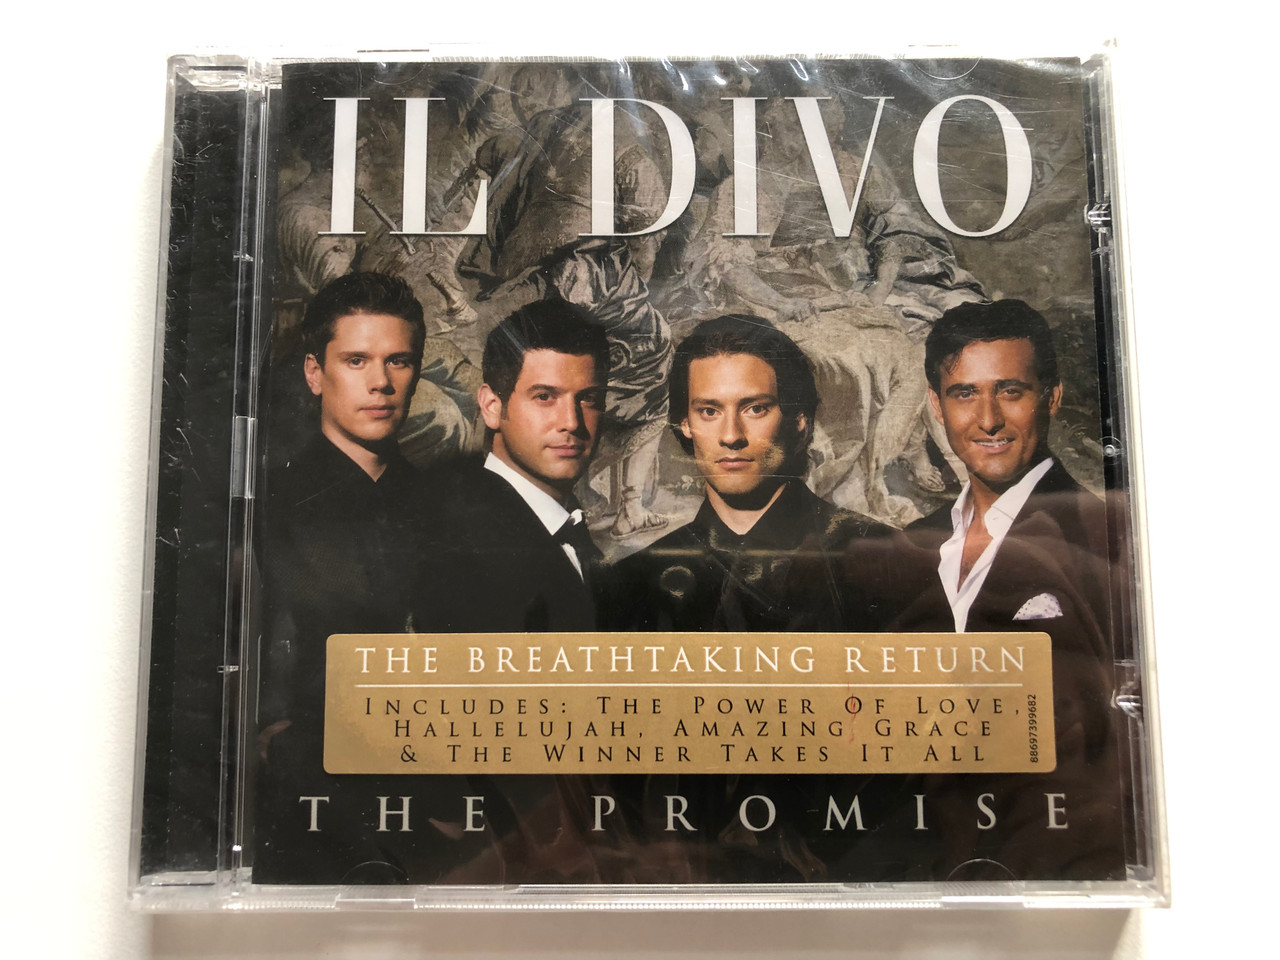 Il Divo – The Promise / The Breathtaking Return. Includes: The Power Of  Love, Hallelujah, Amazing Grace & The Winner Takes It All / Syco Music  Audio CD 2008 / 88697399682 - bibleinmylanguage